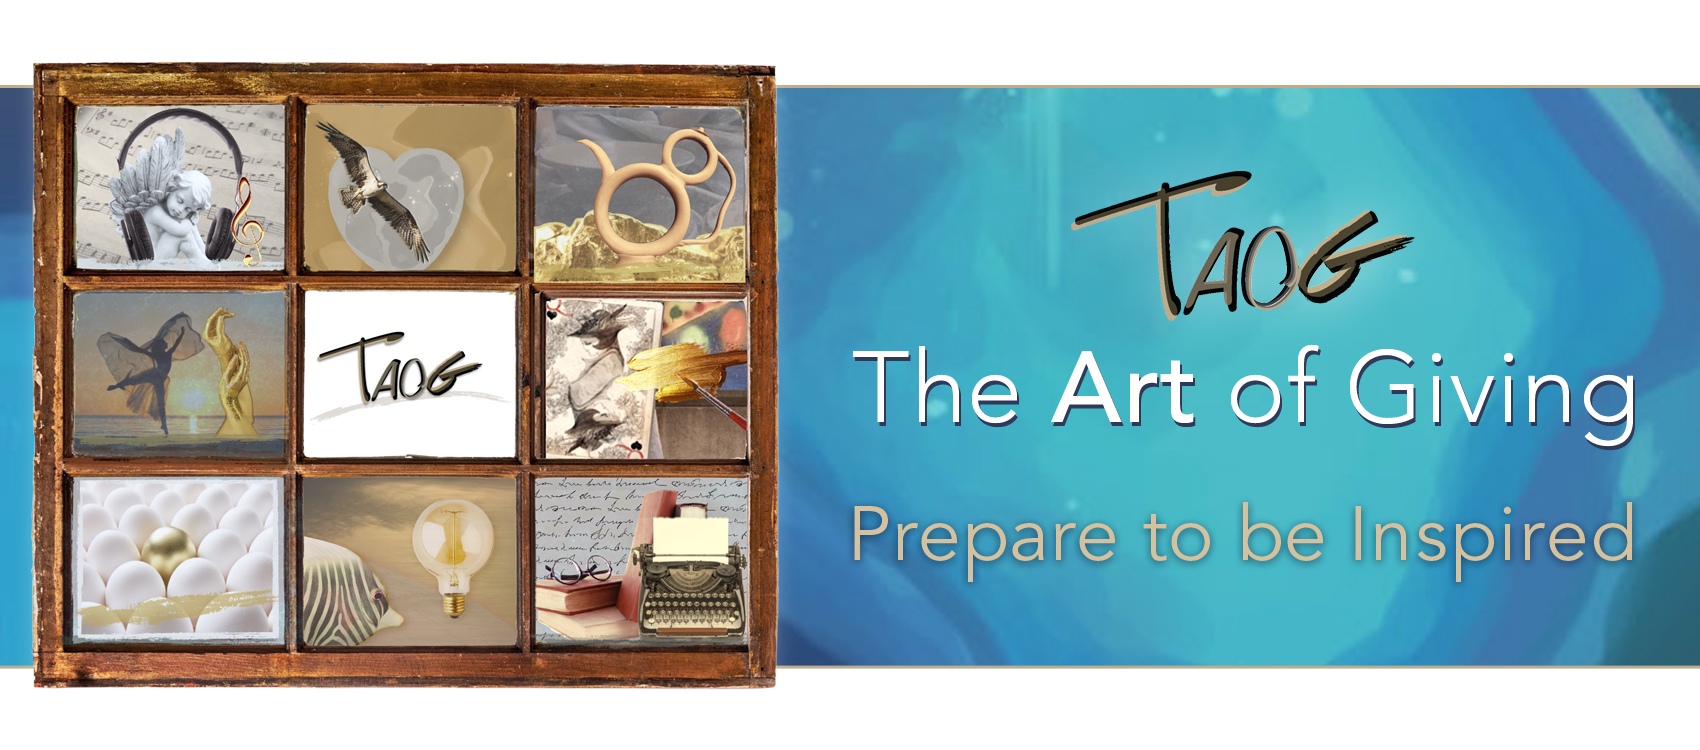 TAOG - The Art of Giving